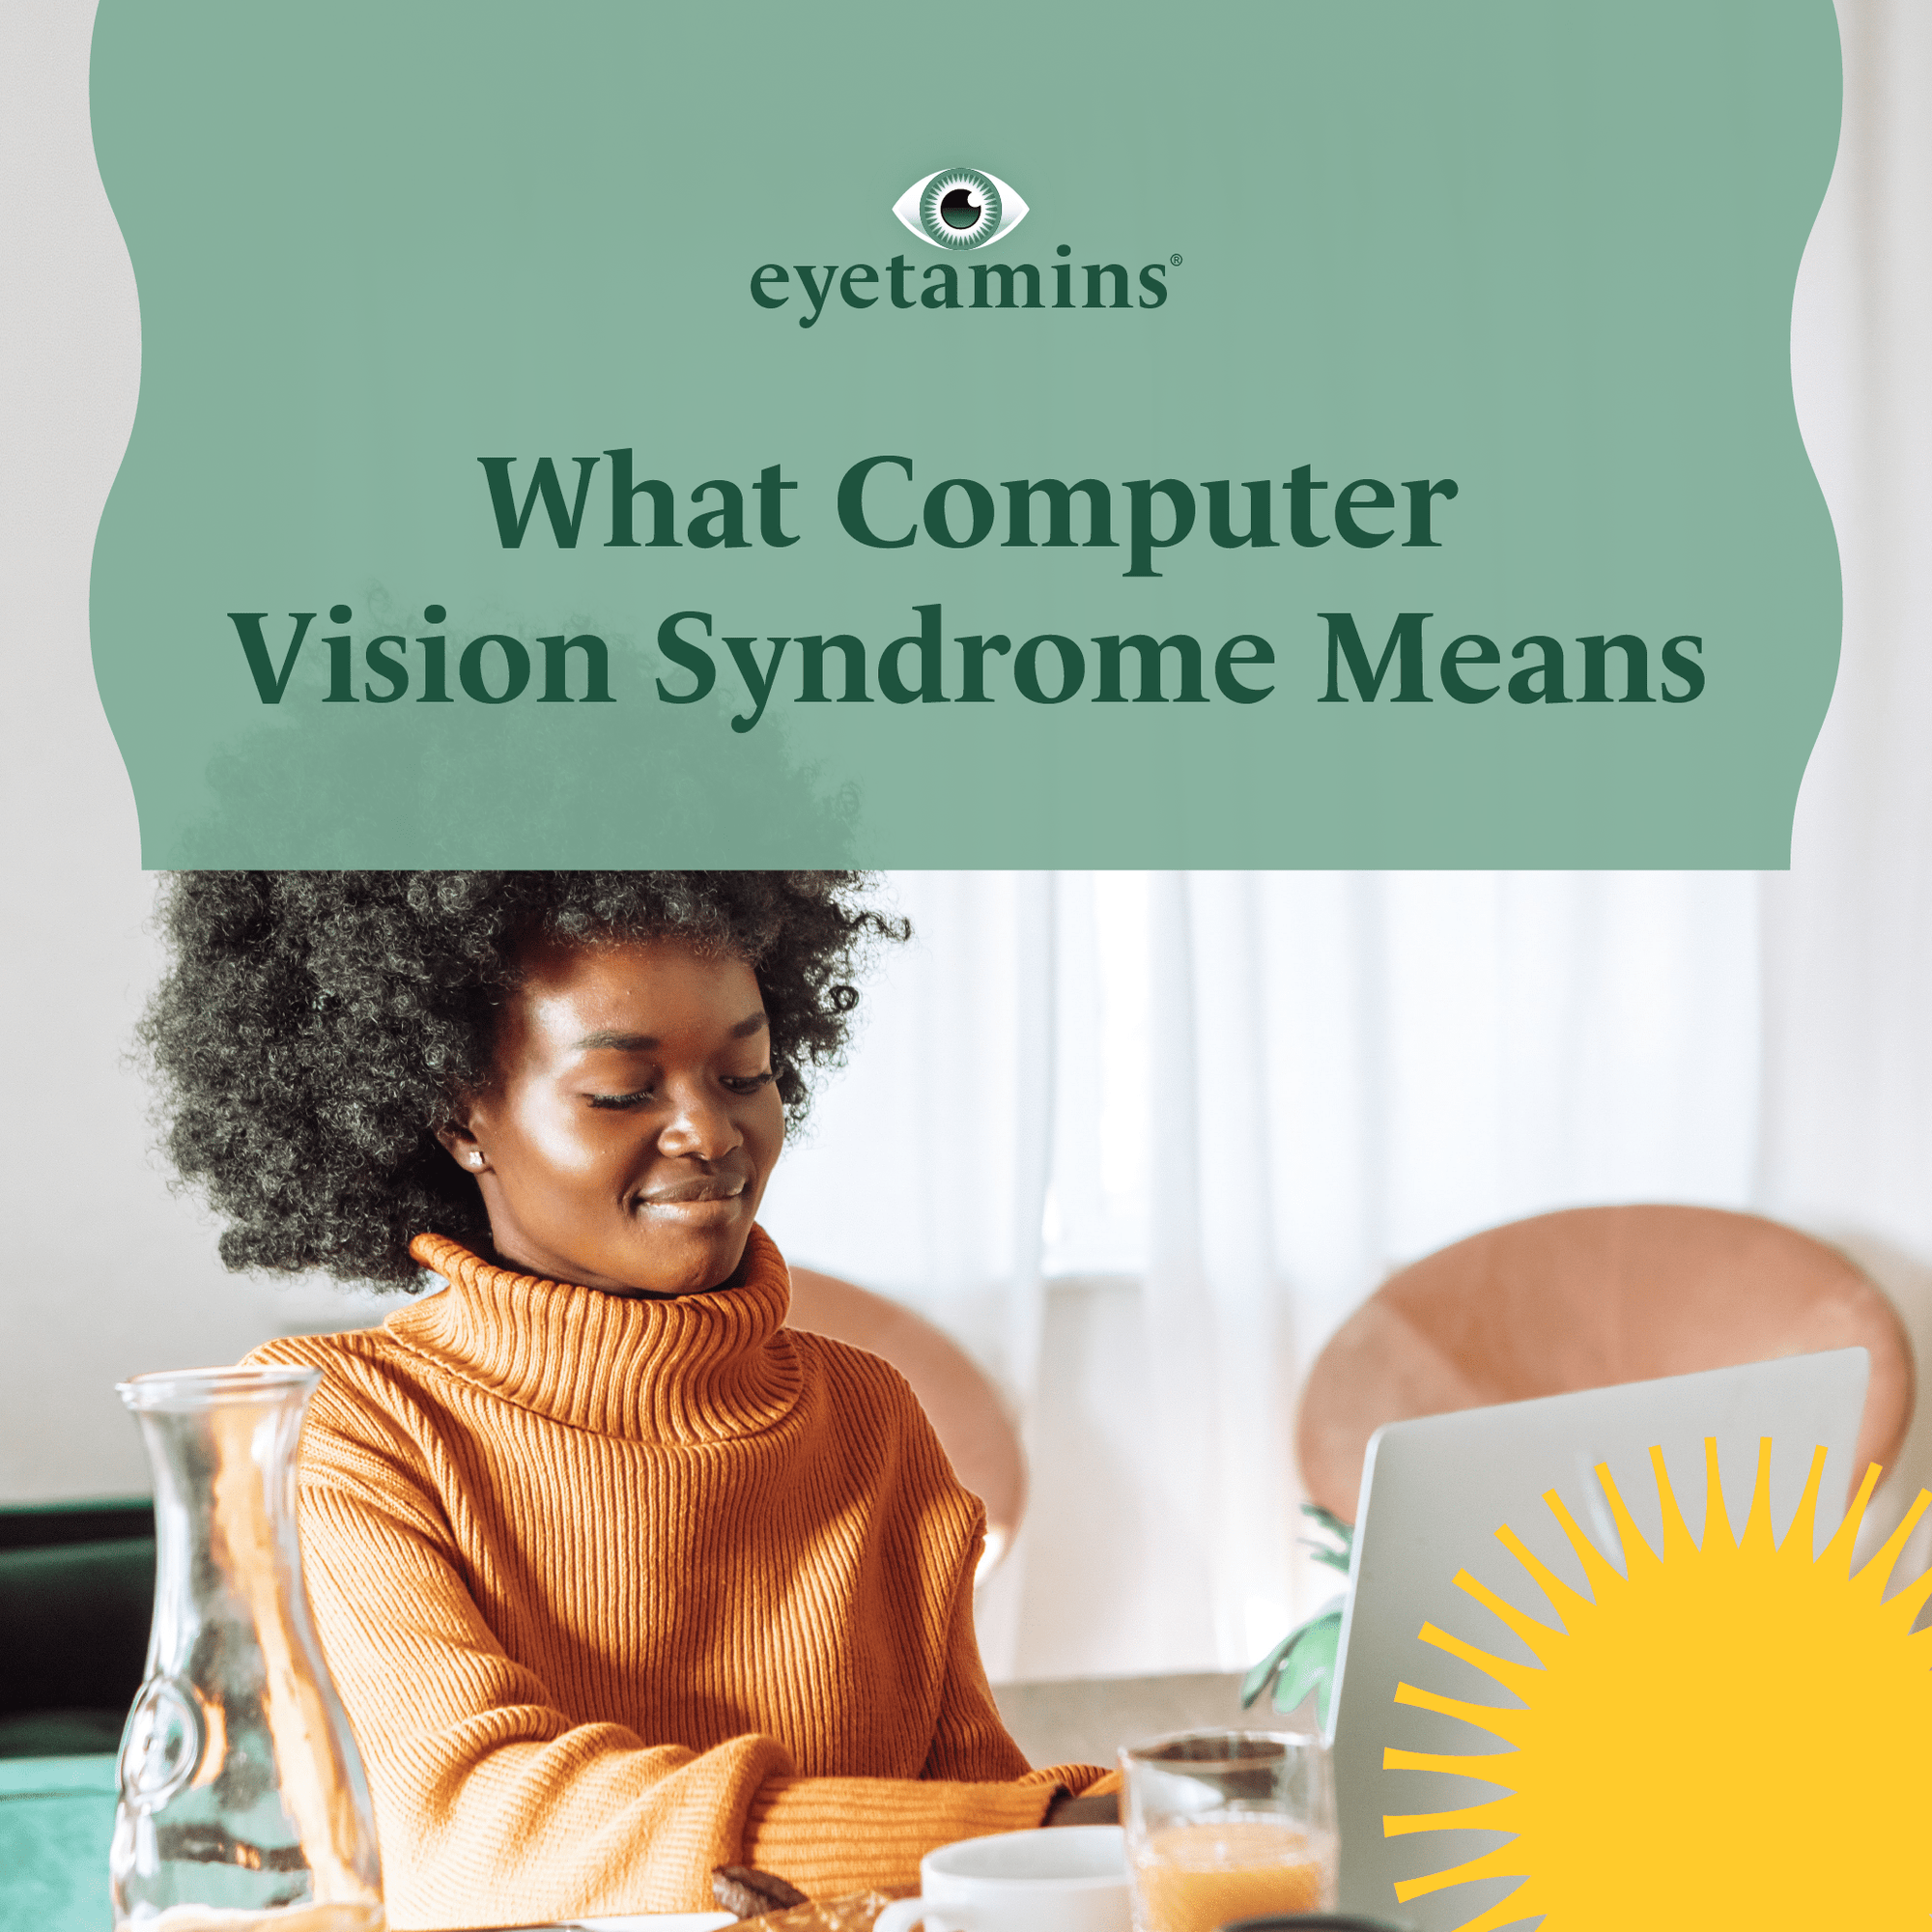 Eyetamins - What Computer Vision Syndrome Means